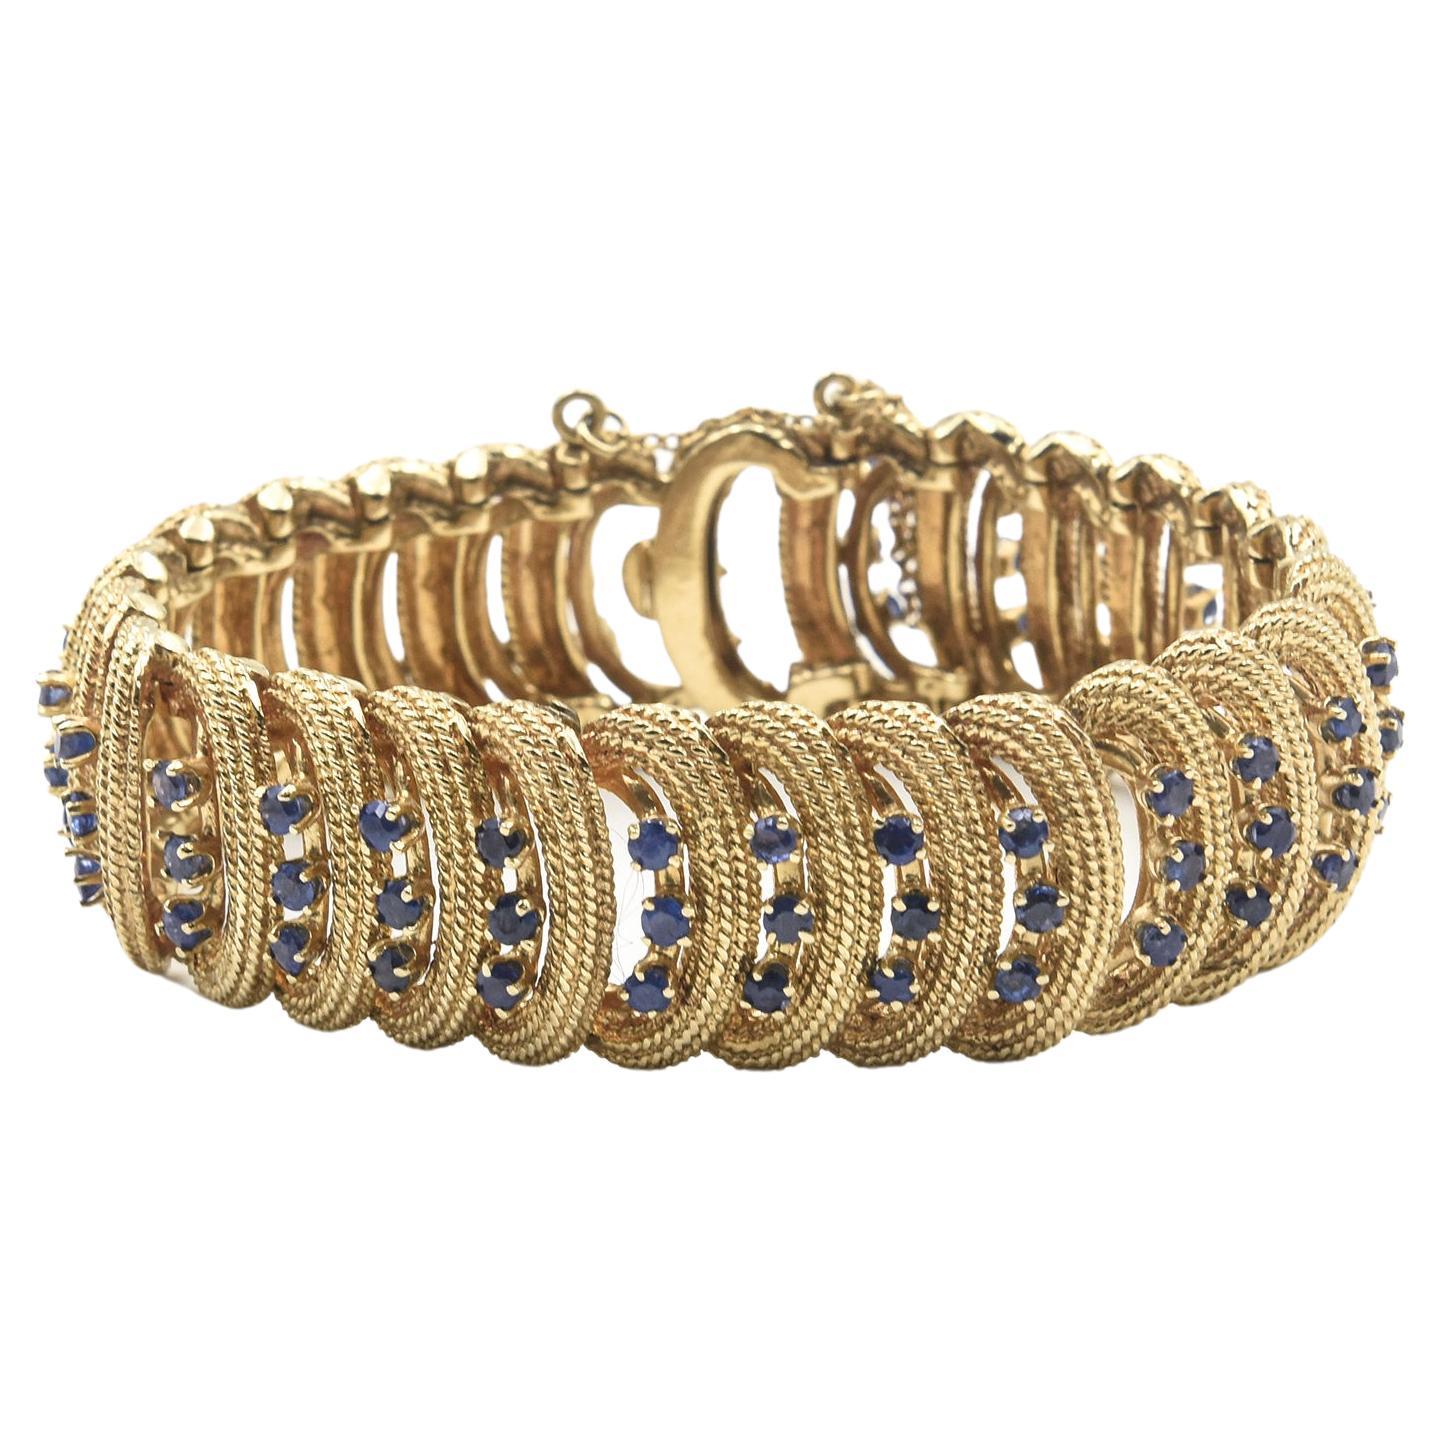 Mid 20th Century Sapphire and Stylized Textured Rope Gold Bracelet For Sale